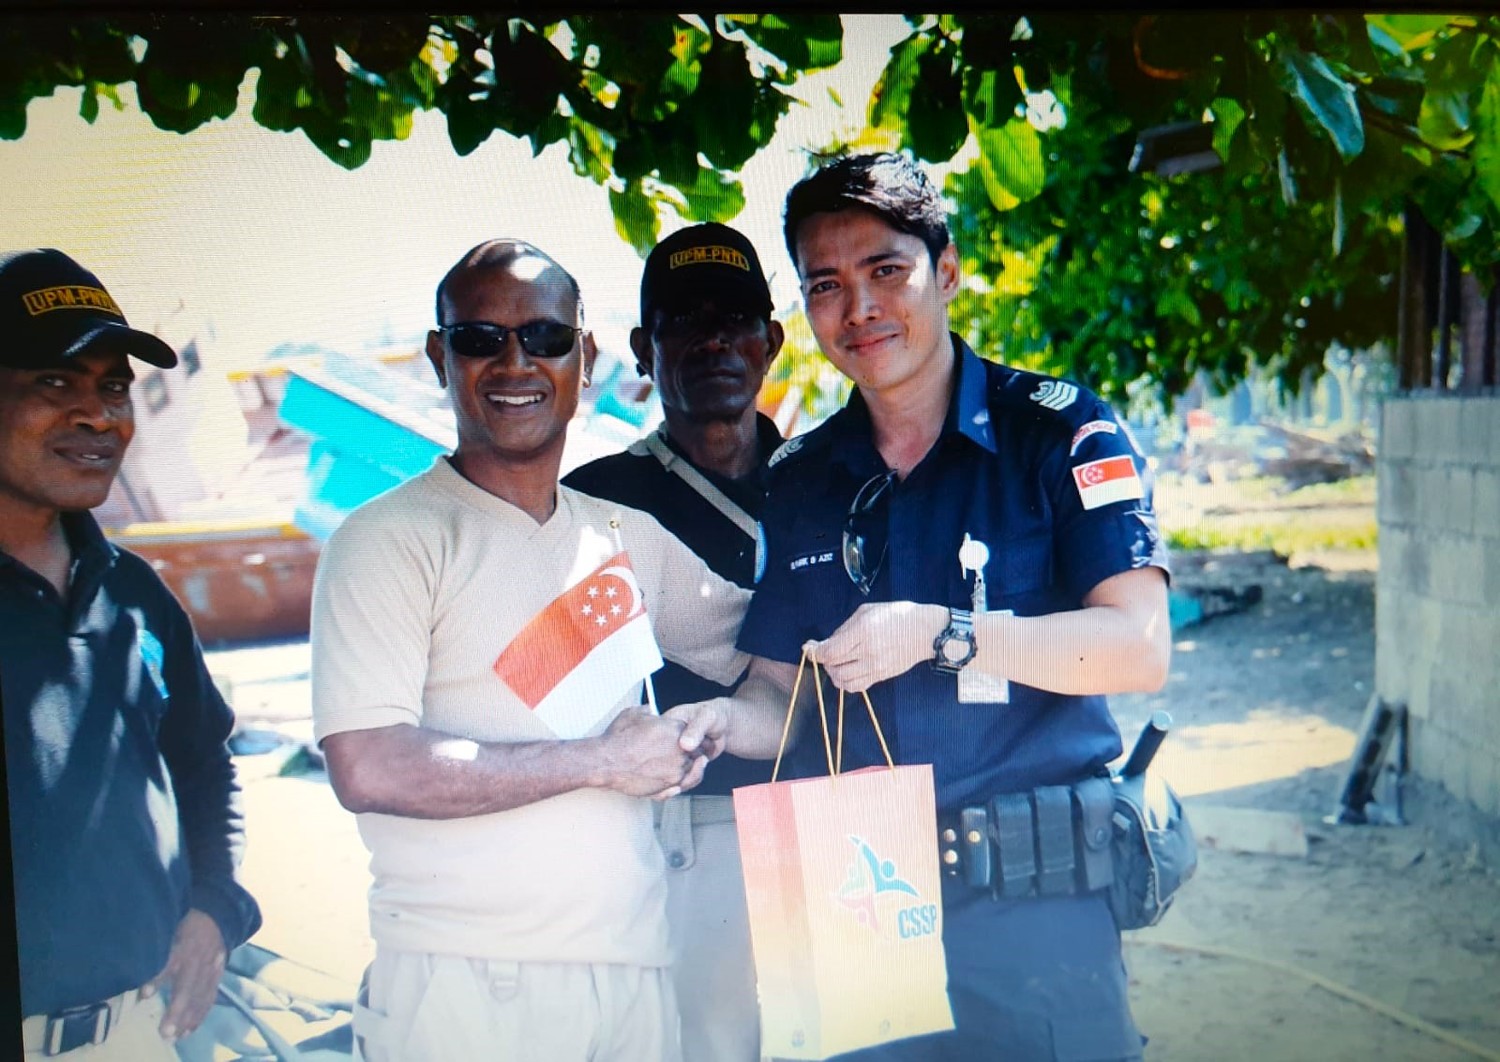 SI Farik on the right, giving a small gift bag to the commissioner, under a shaded tree. The Commissioner is a bald headed man, wearing a pair of sun glasses and a light brown t-shirt. 